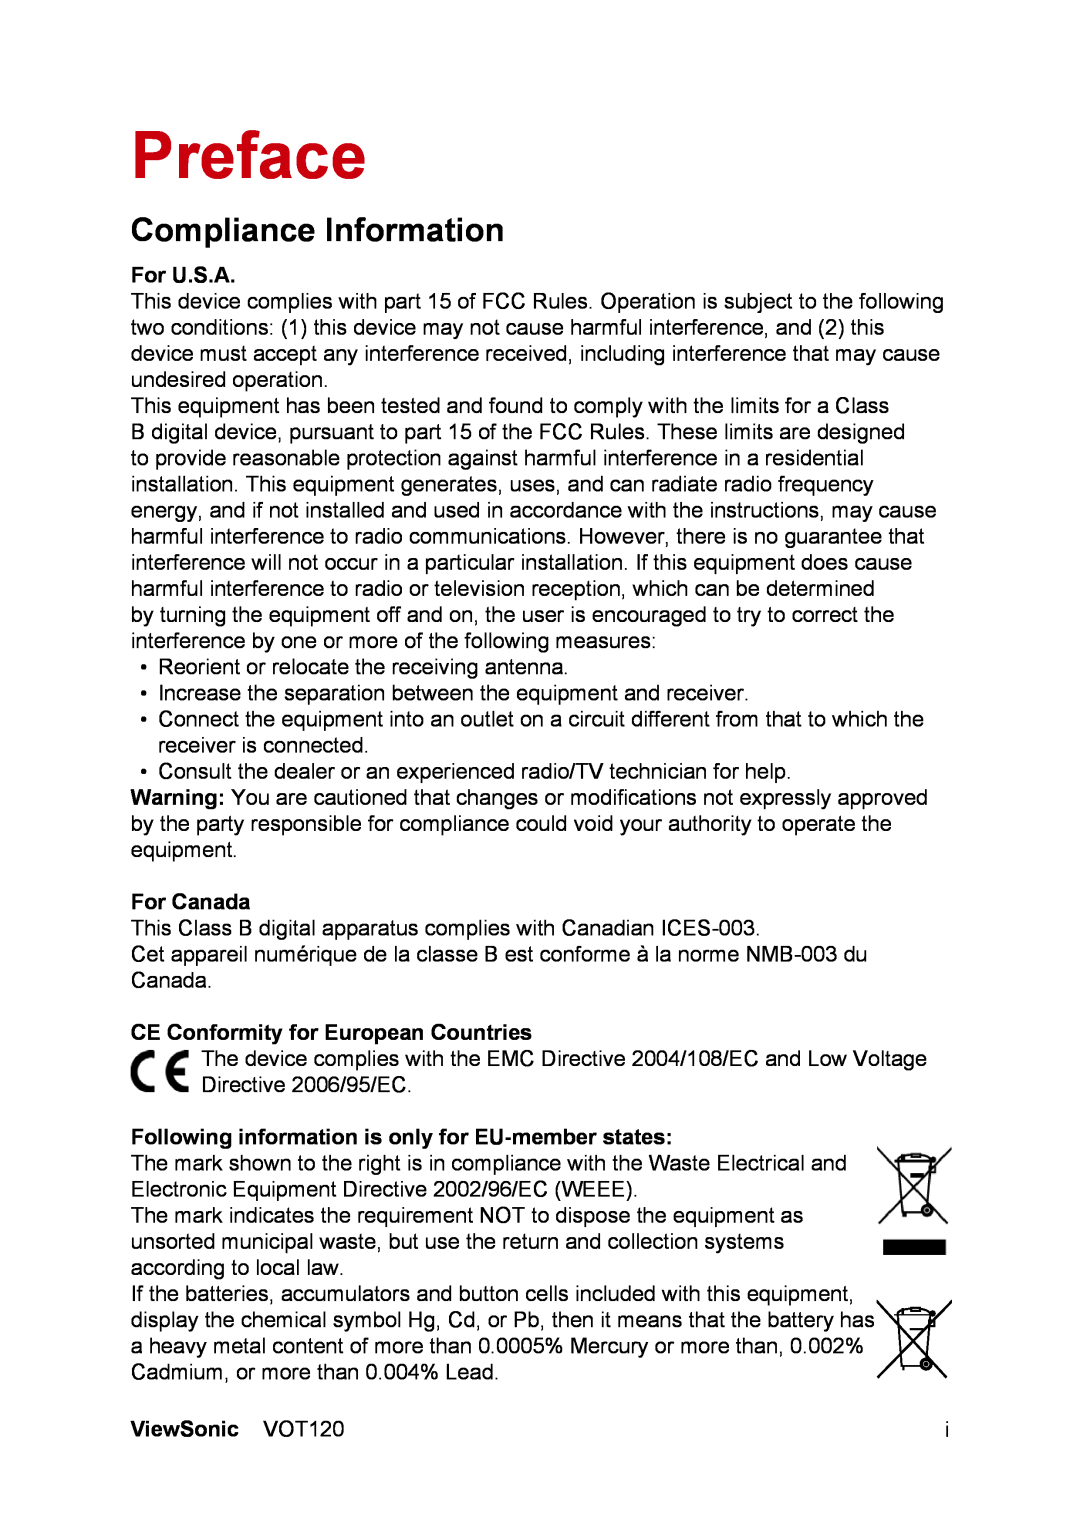 ViewSonic VS12869 Compliance Information, For U.S.A, For Canada, CE Conformity for European Countries, ViewSonic VOT120 